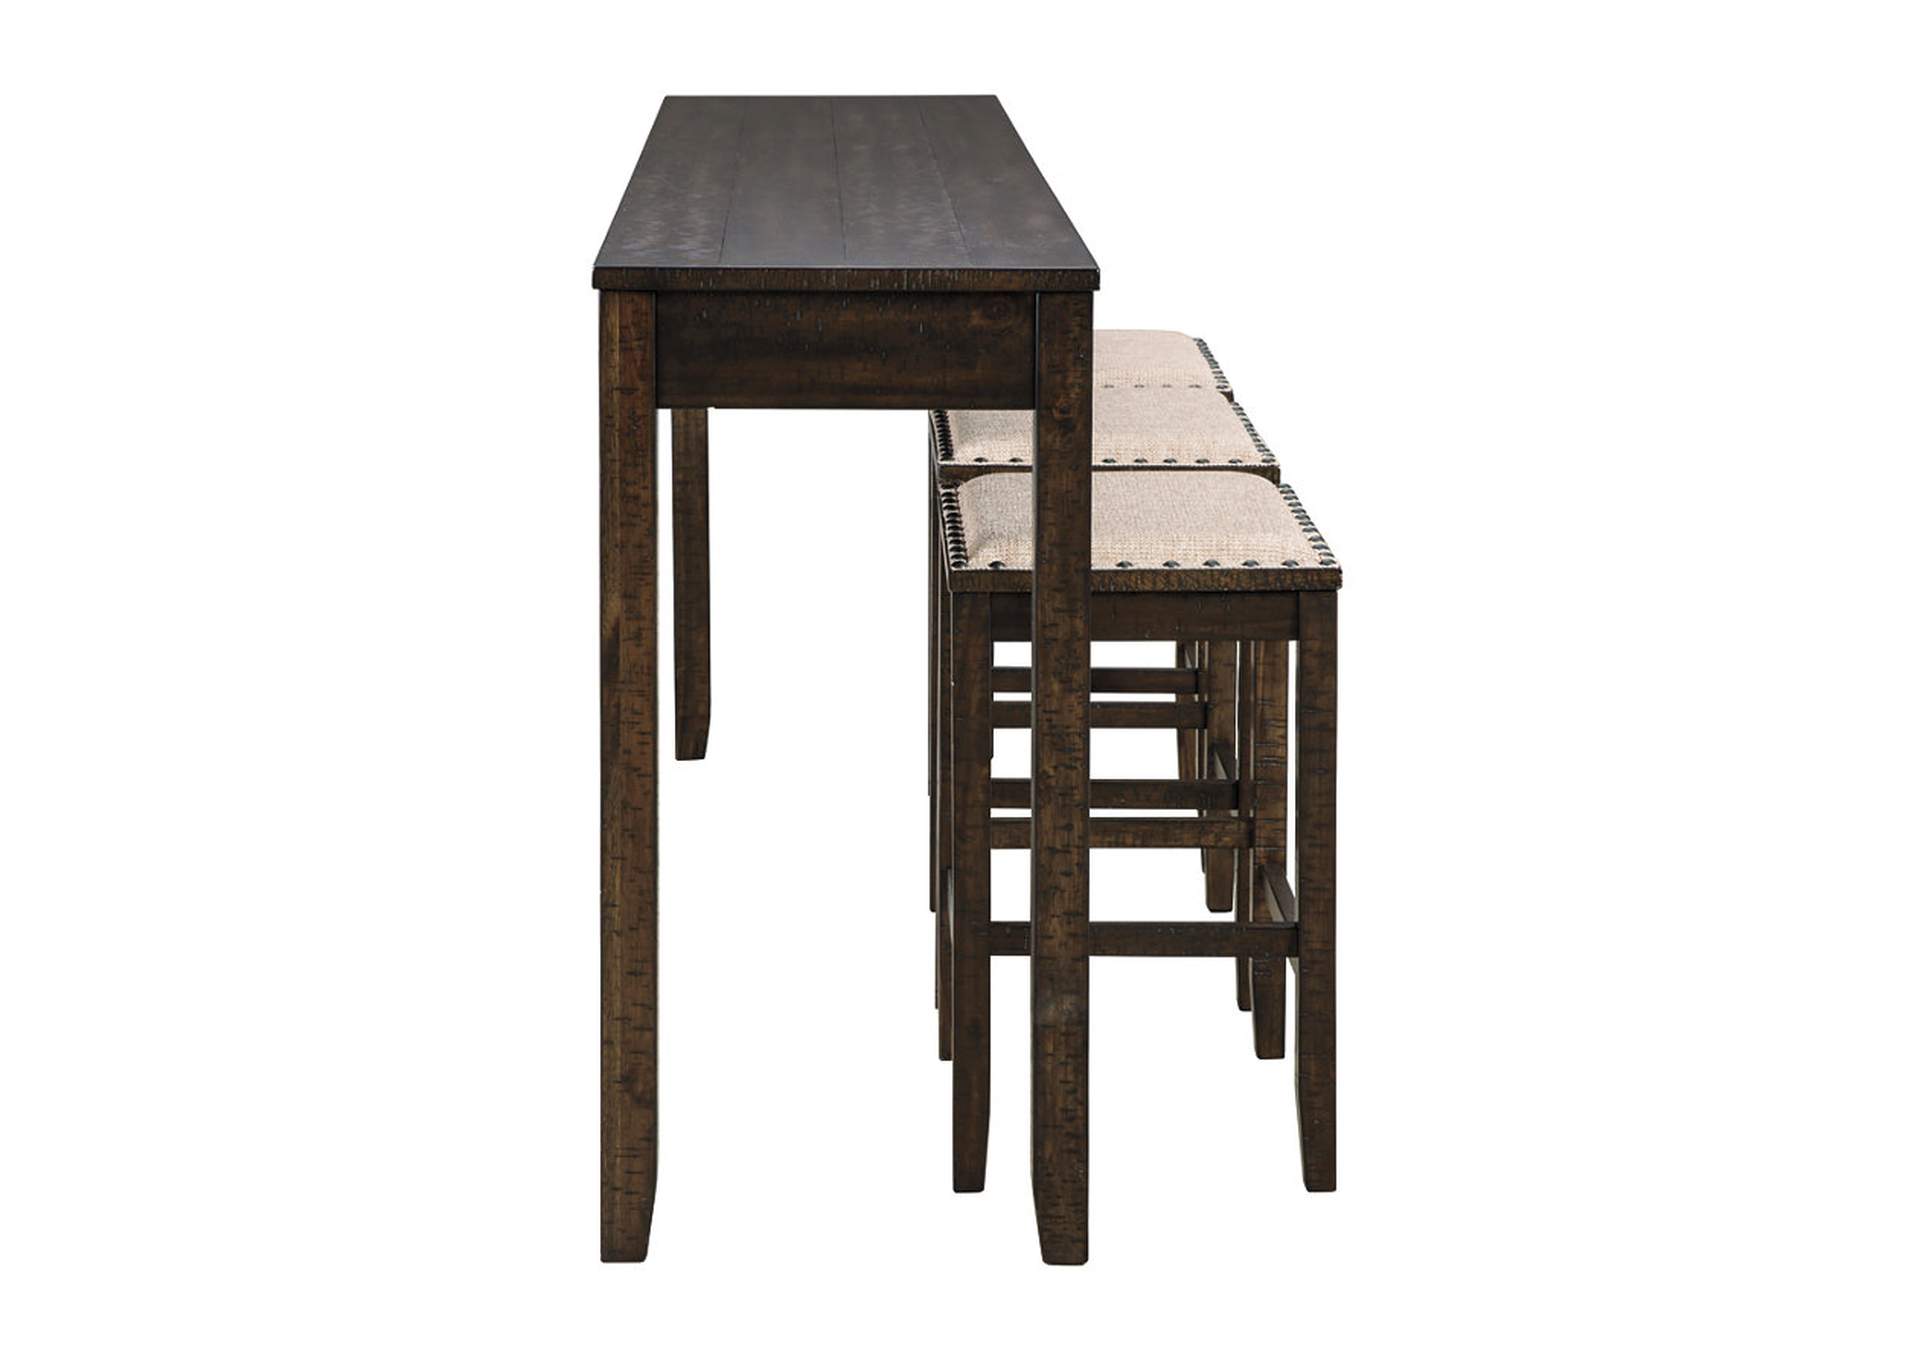 Rokane Counter Height Dining Table and Bar Stools (Set of 4),Signature Design By Ashley